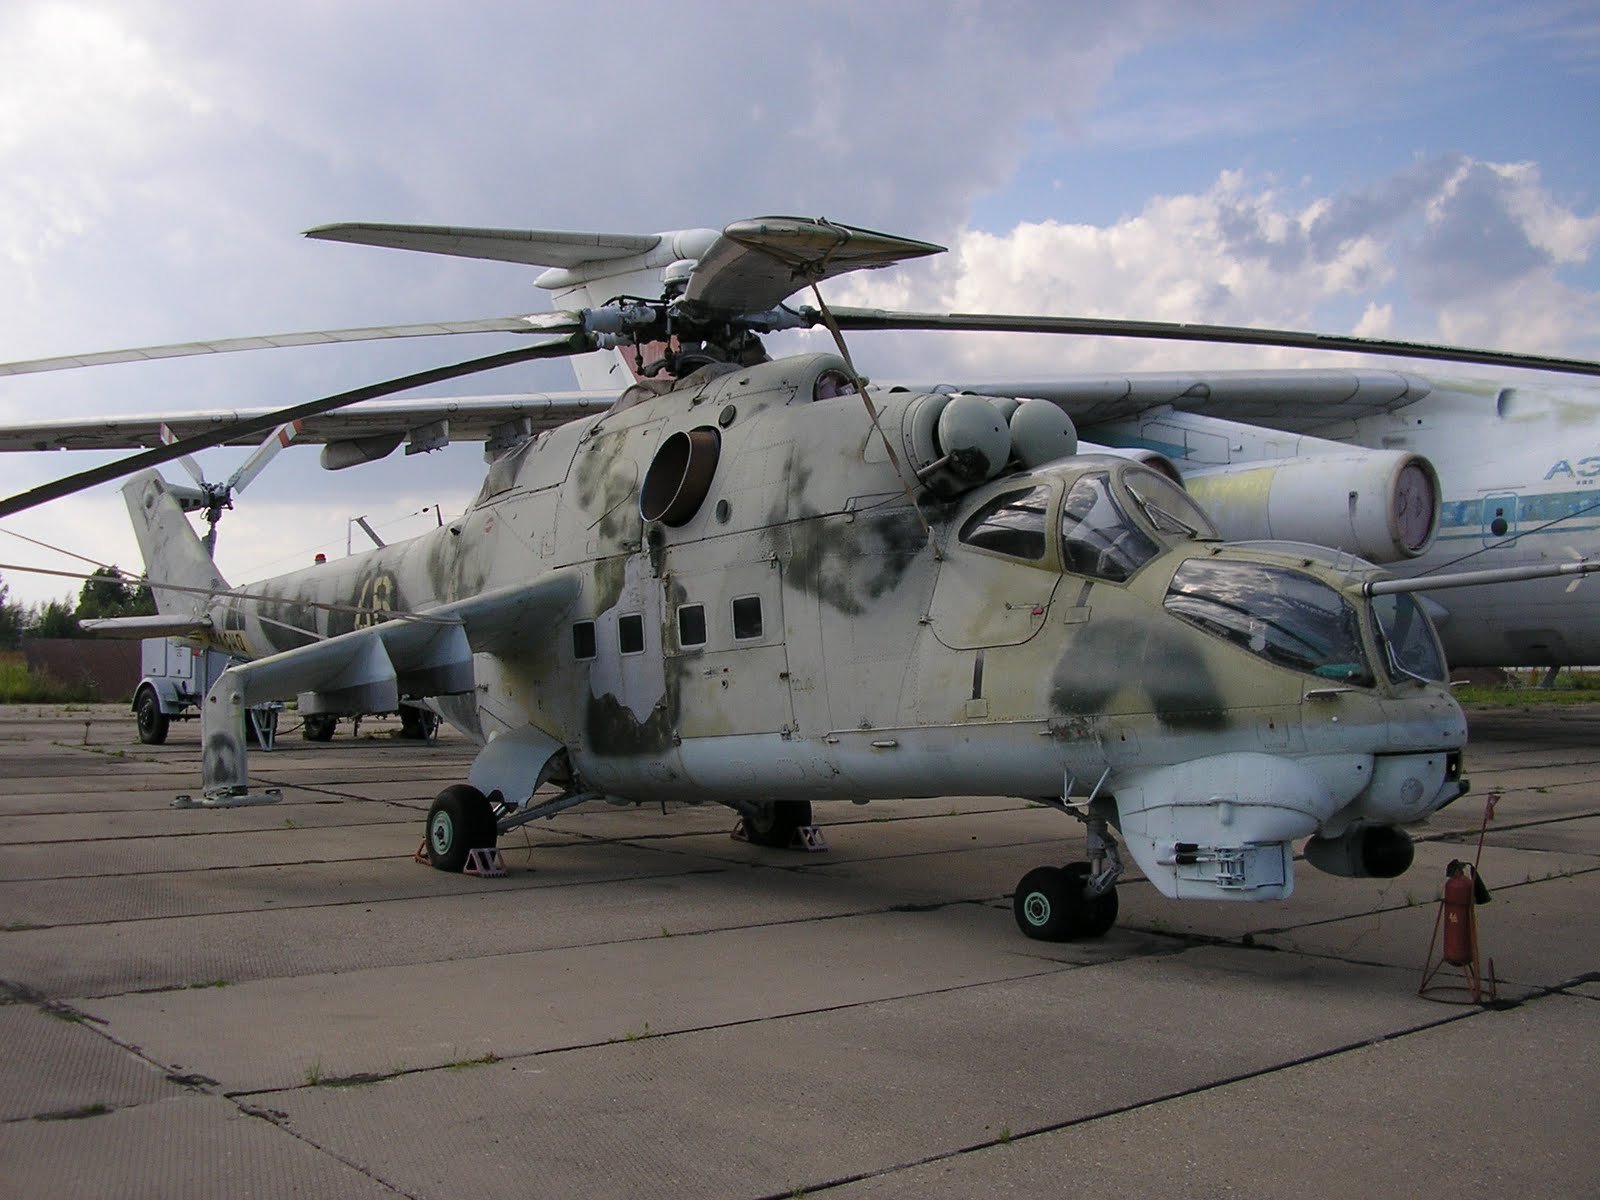 mi 24, Hind, Gunship, Russian, Russia, Military, Weapon, Helicopter, Aircraft,  23 Wallpaper